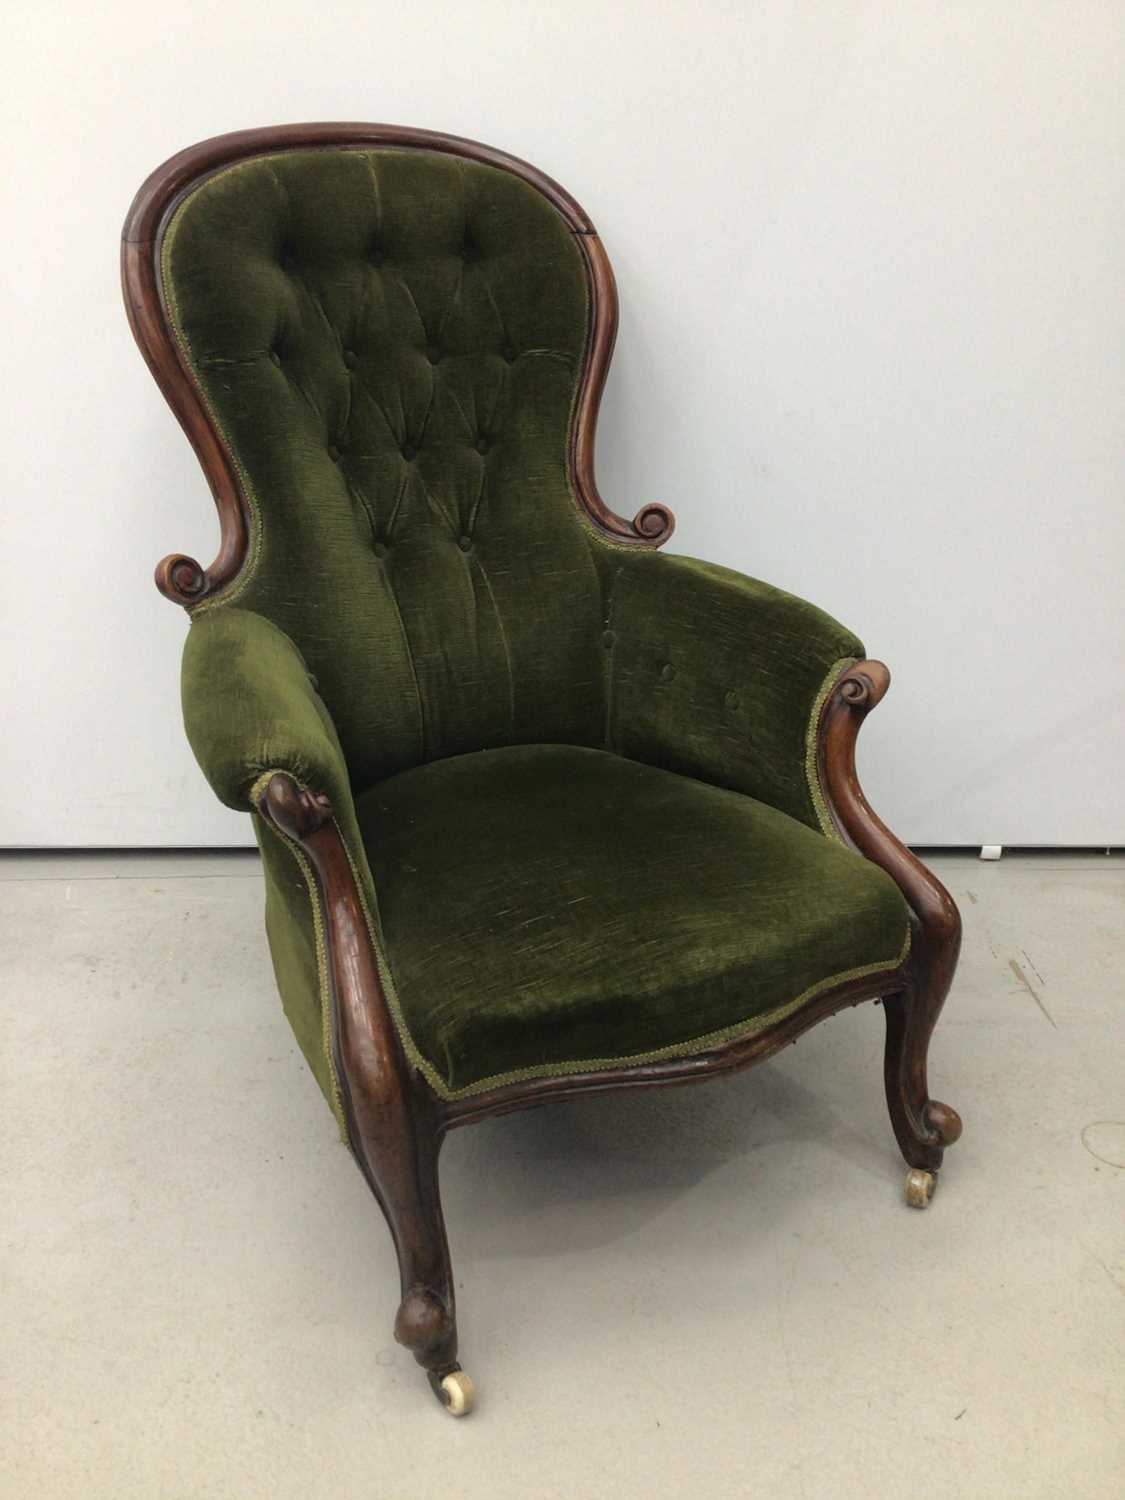 Lot 75 - Victorian mahogany mahogany spoon back armchair, with green button velvet upholstery and showwood frame on cabriole legs and castors